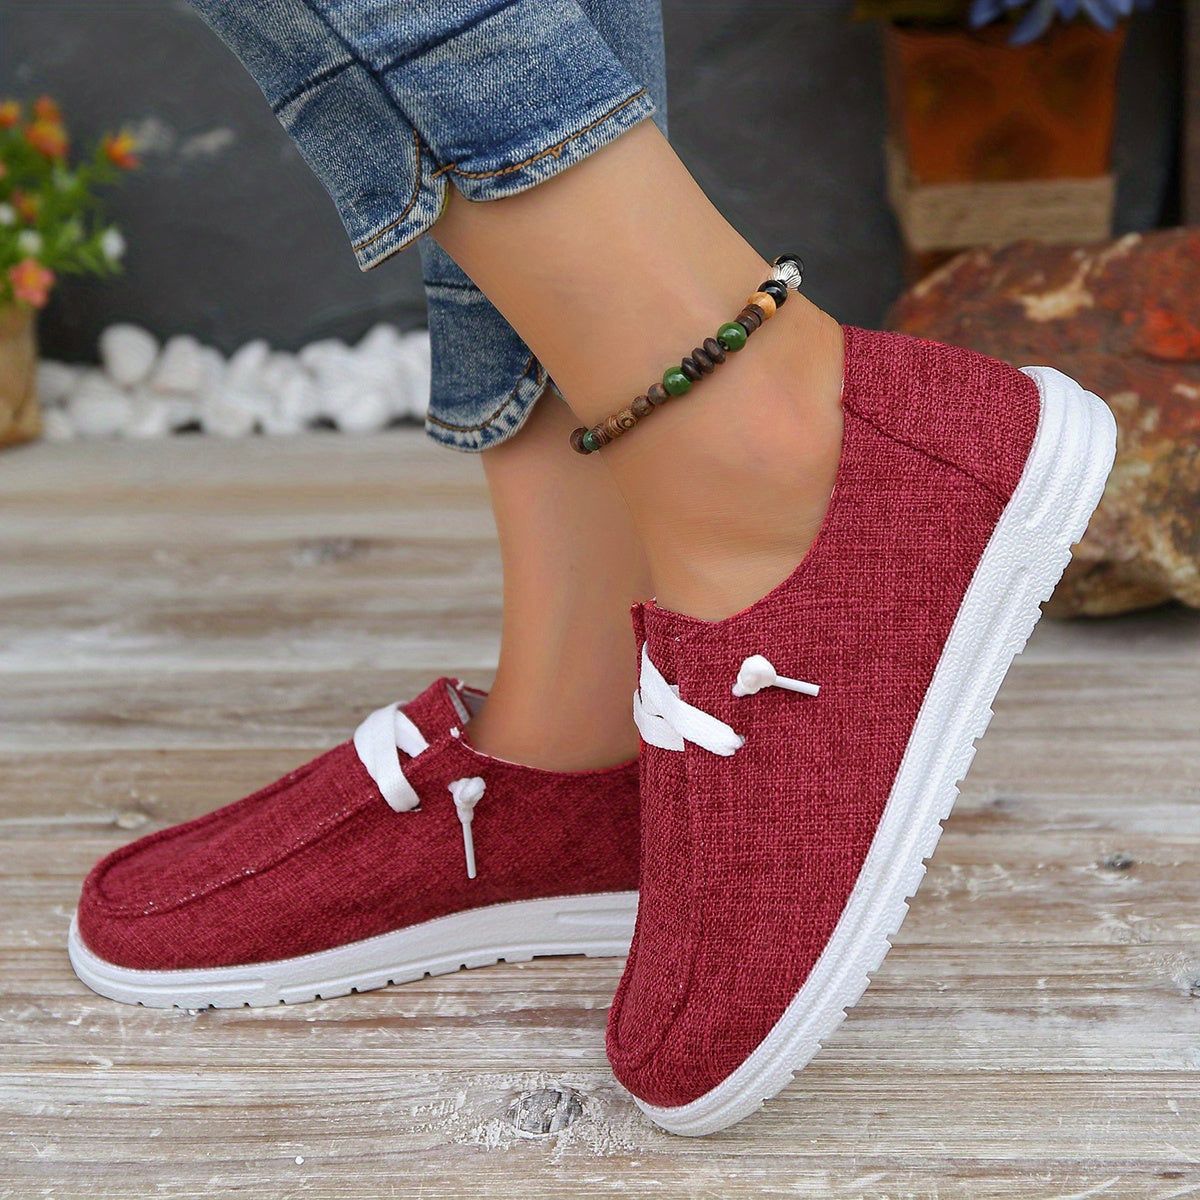 Women's Solid Color Canvas Shoes, Casual Lace Up Outdoor Shoes, Lightweight Low Top Walking Shoes